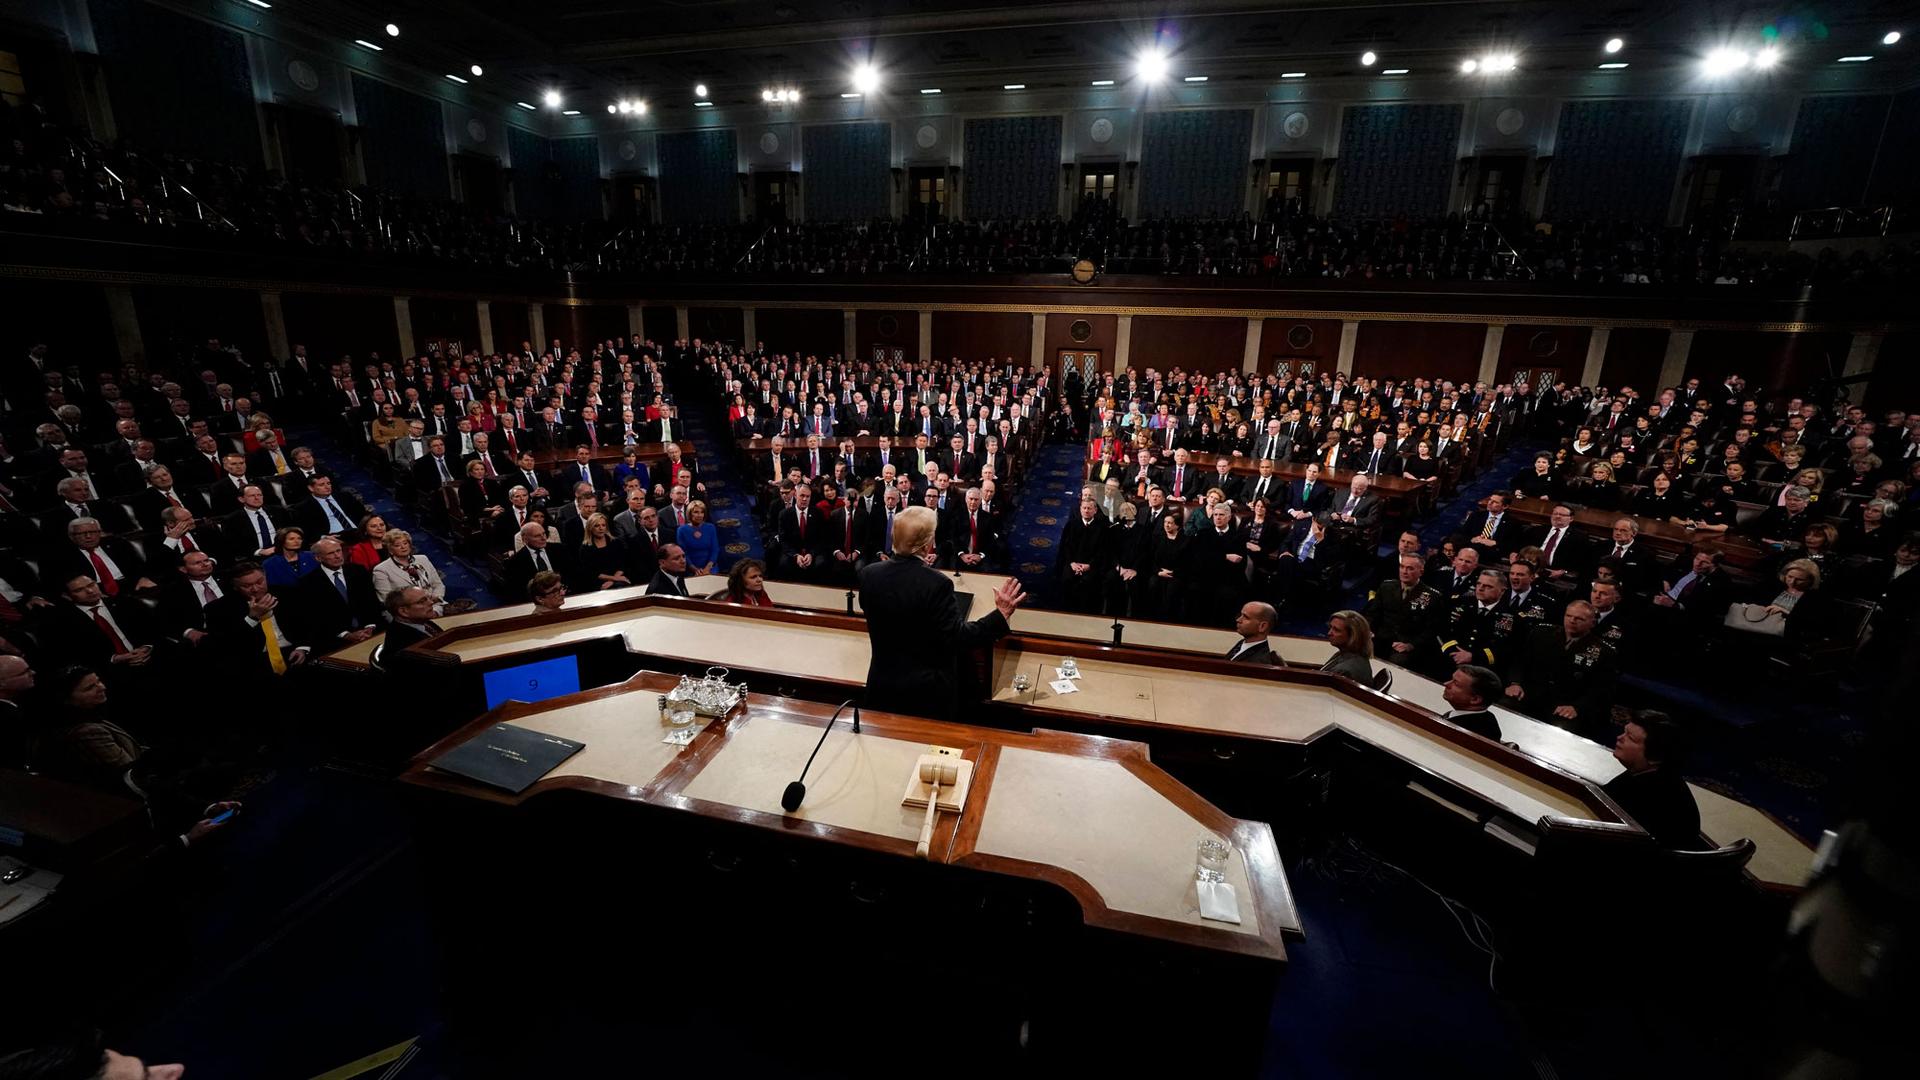 This is a view of the State of the Union crowd with Donald Trump at the center and the seated guests and Congress around him.